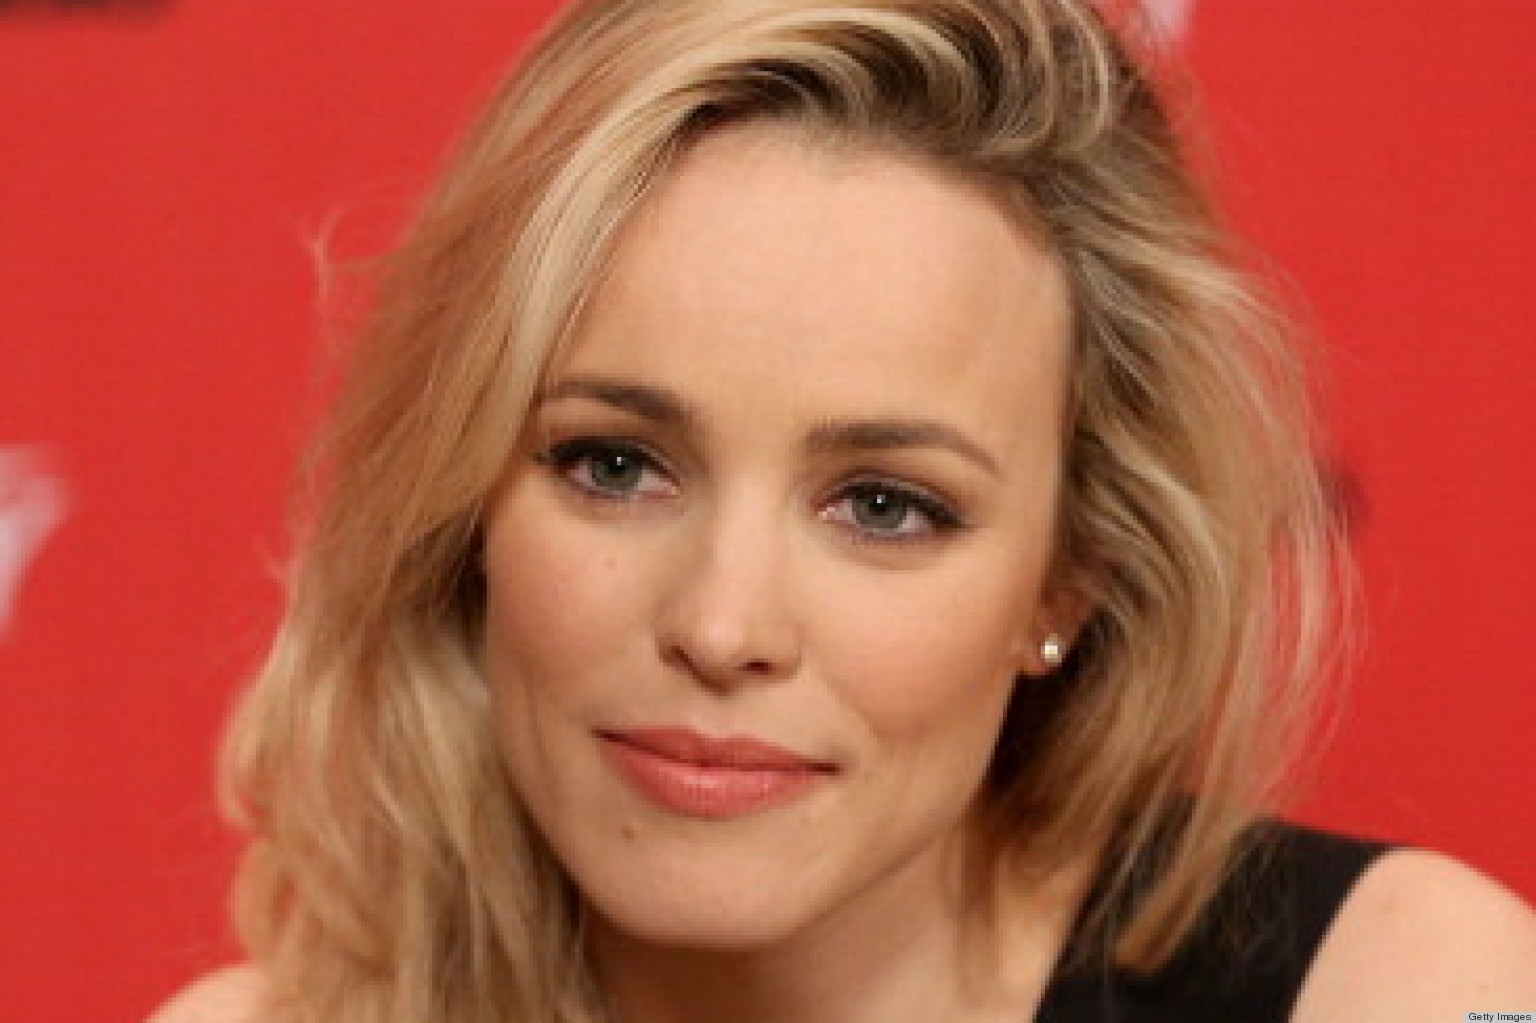 Rachel McAdams Hair Is Now Red What Do You Think PHOTO HuffPost